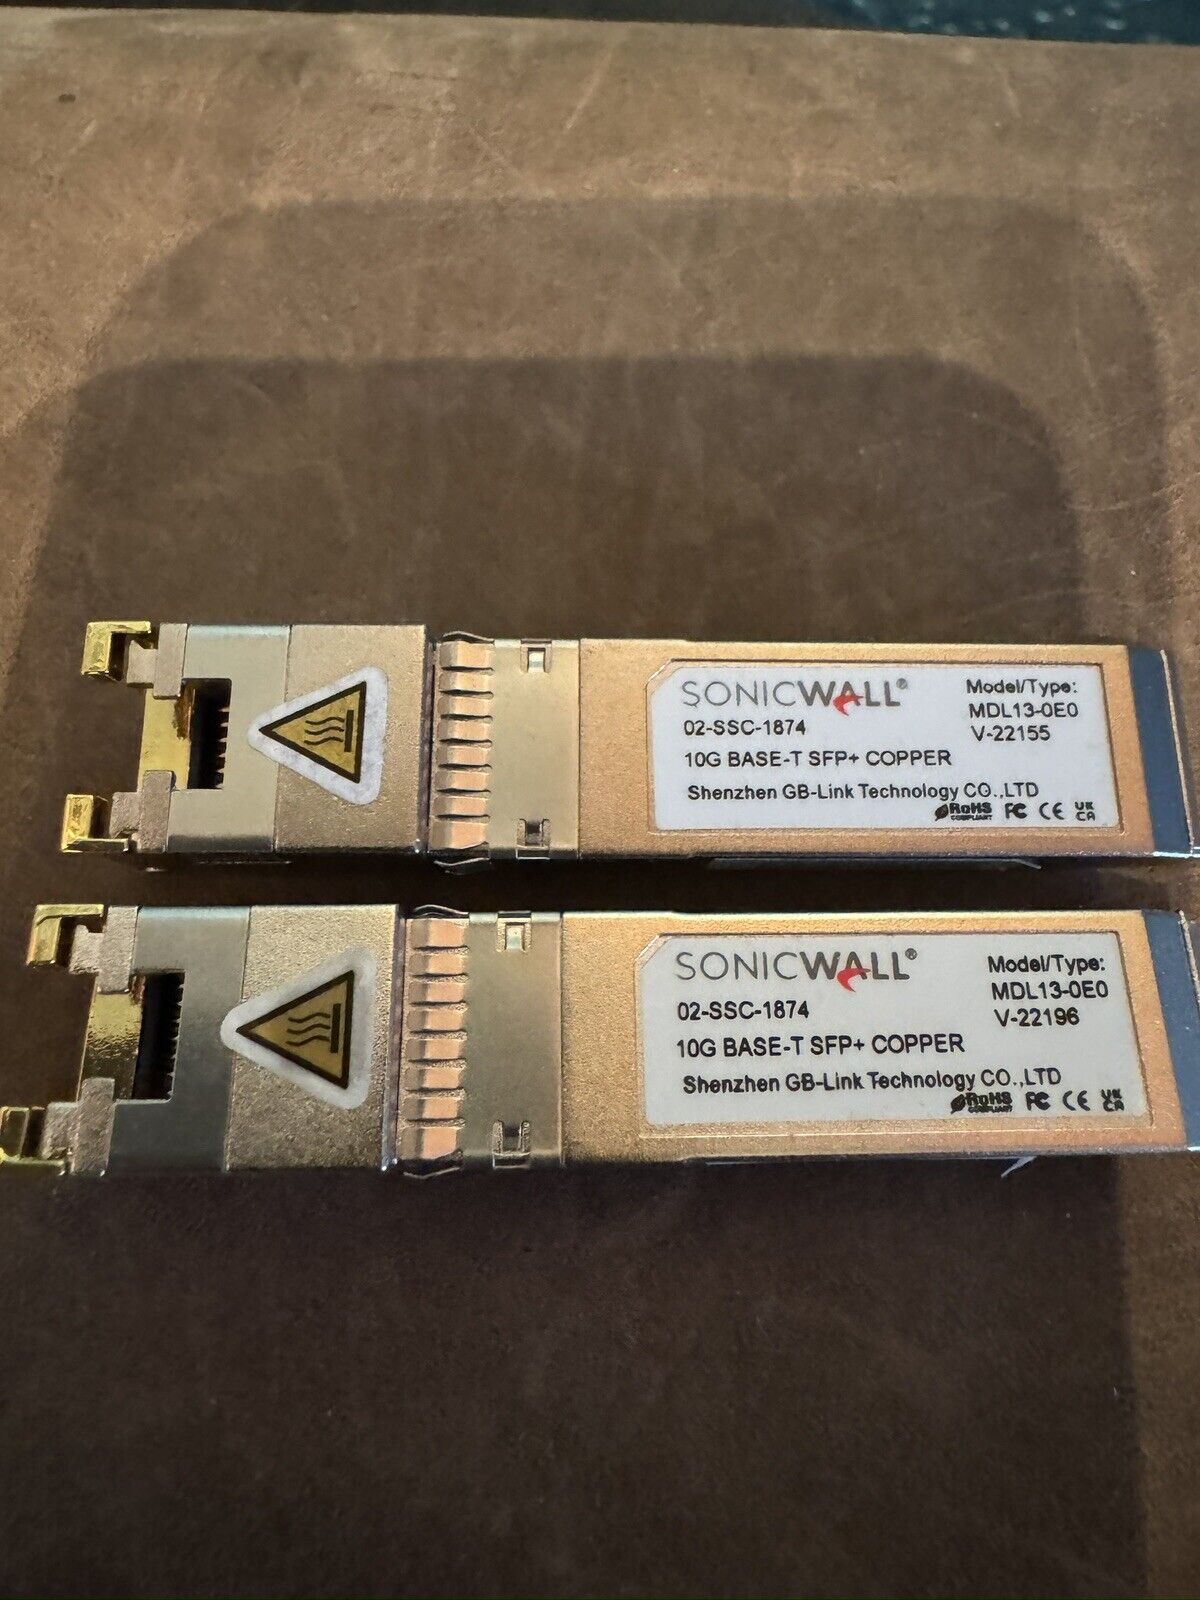 Genuine Sonicwall 02-SSC-1874 SFP+ 10gbase-T  10GbE RJ-45 Transceiver